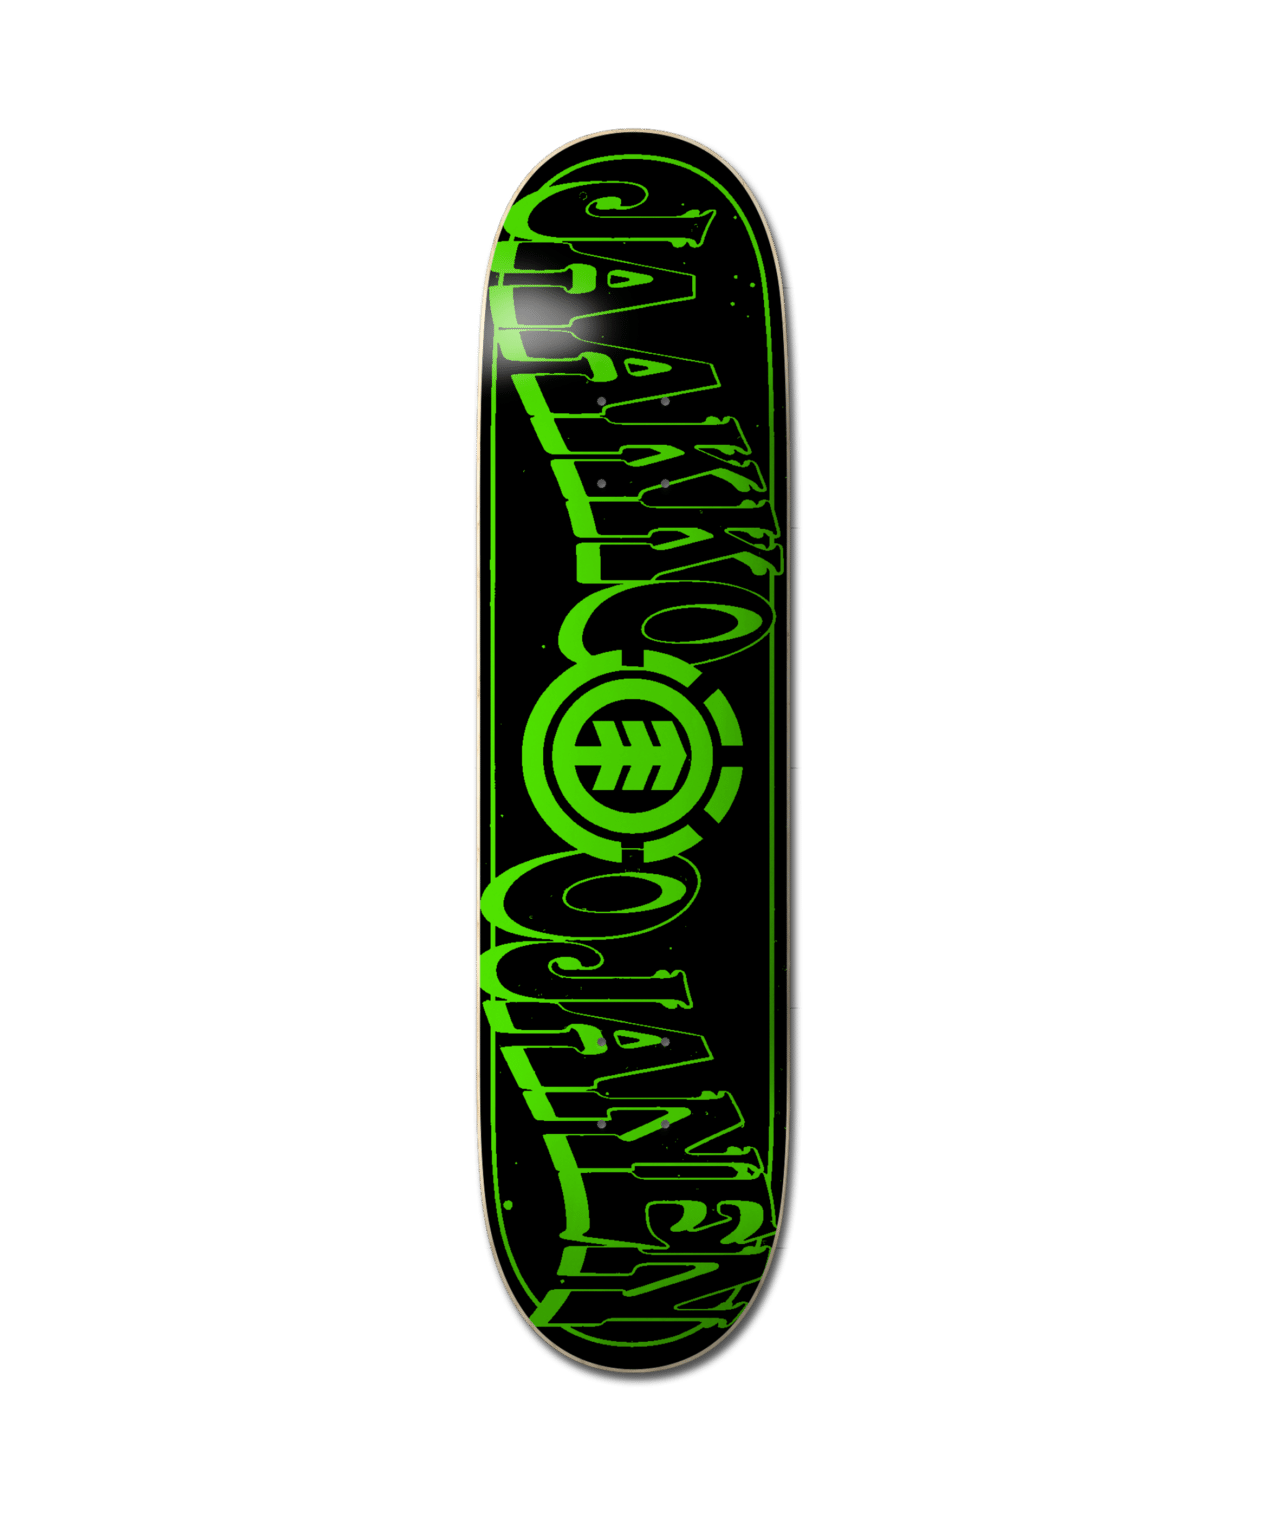 Element Out There Jaakko Glow-in-the-Dark Skateboard Deck 8.25" x 31.7" Bottom Glowing